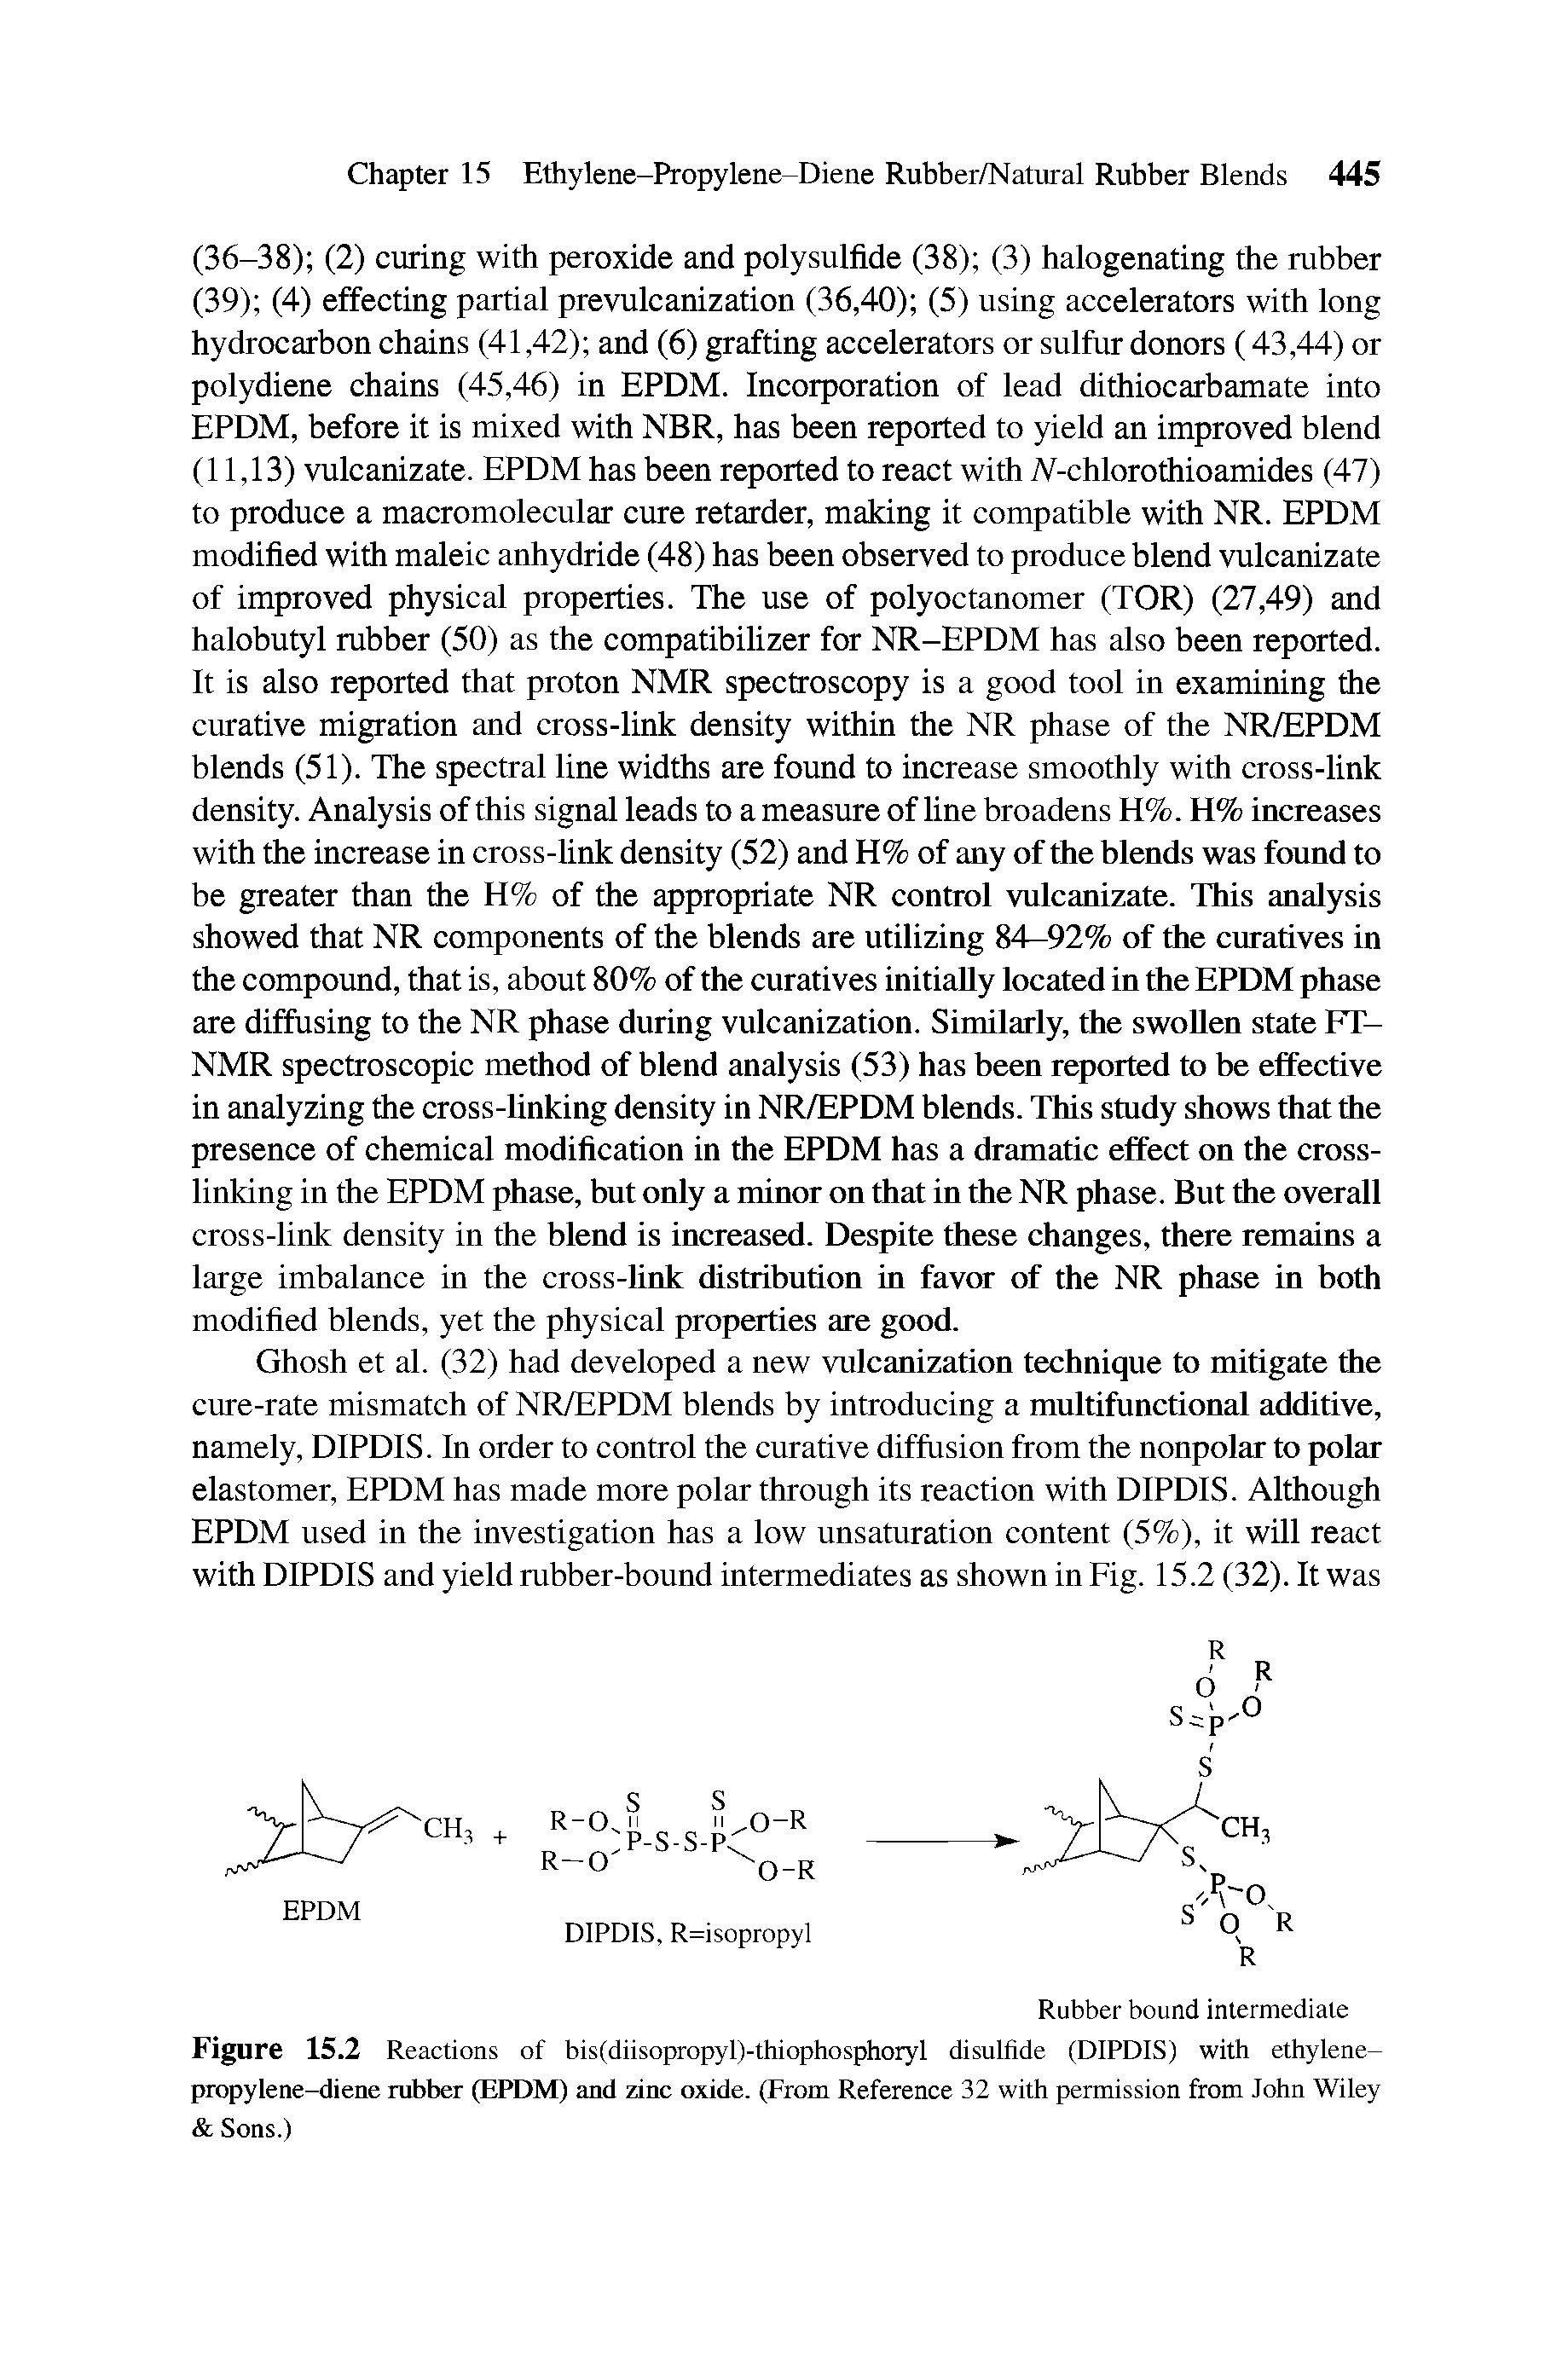 Figure 15.2 Reactions of bis(diisopropyI)-thiophosphoryI disulfide (DIPDIS) with ethylene-propylene-diene rubber (EPDM) and zinc oxide. (From Reference 32 with permission from John Wiley Sons.)...